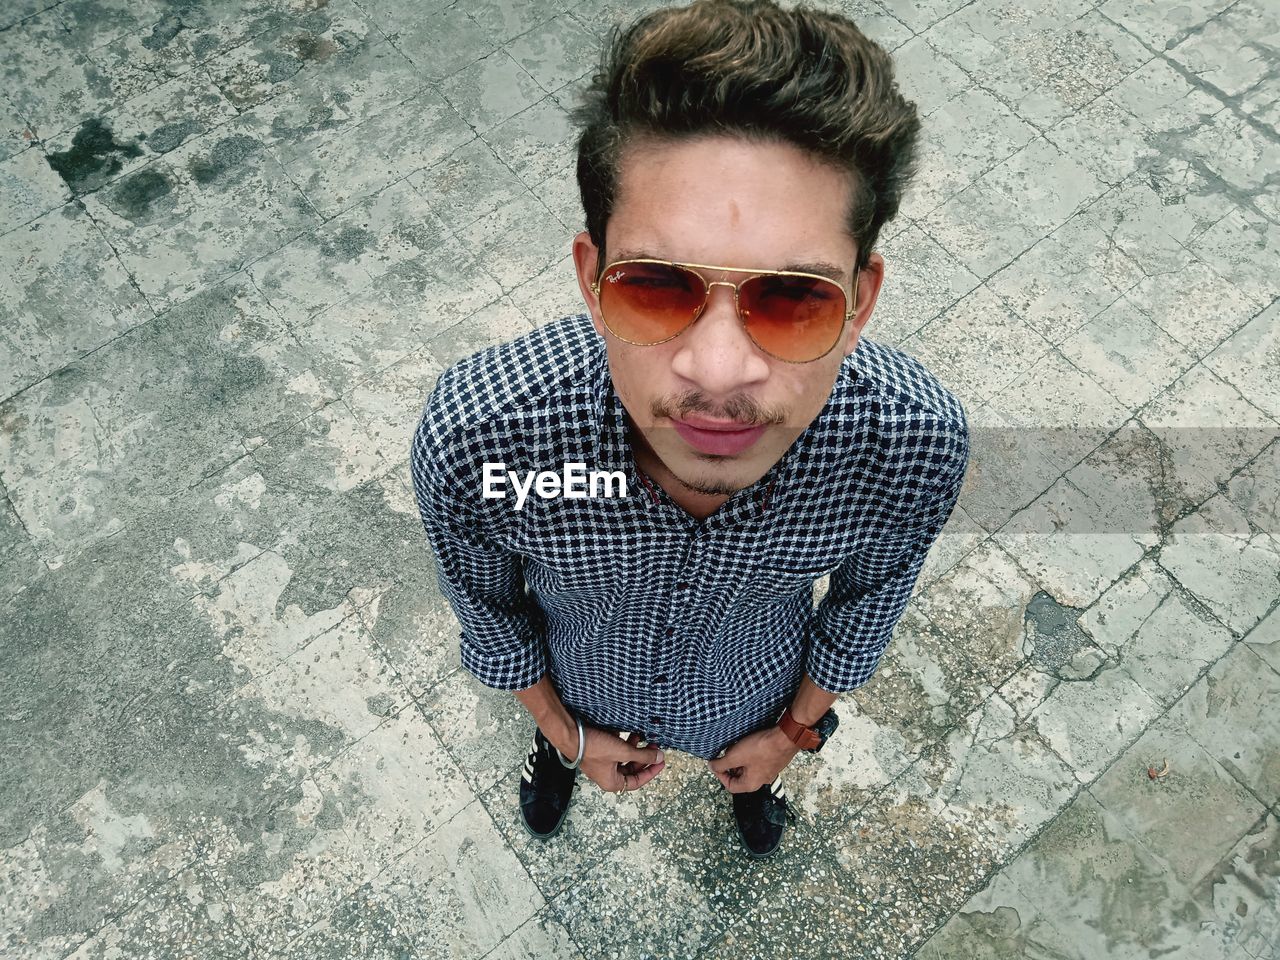 Portrait of young man wearing sunglasses standing on floor